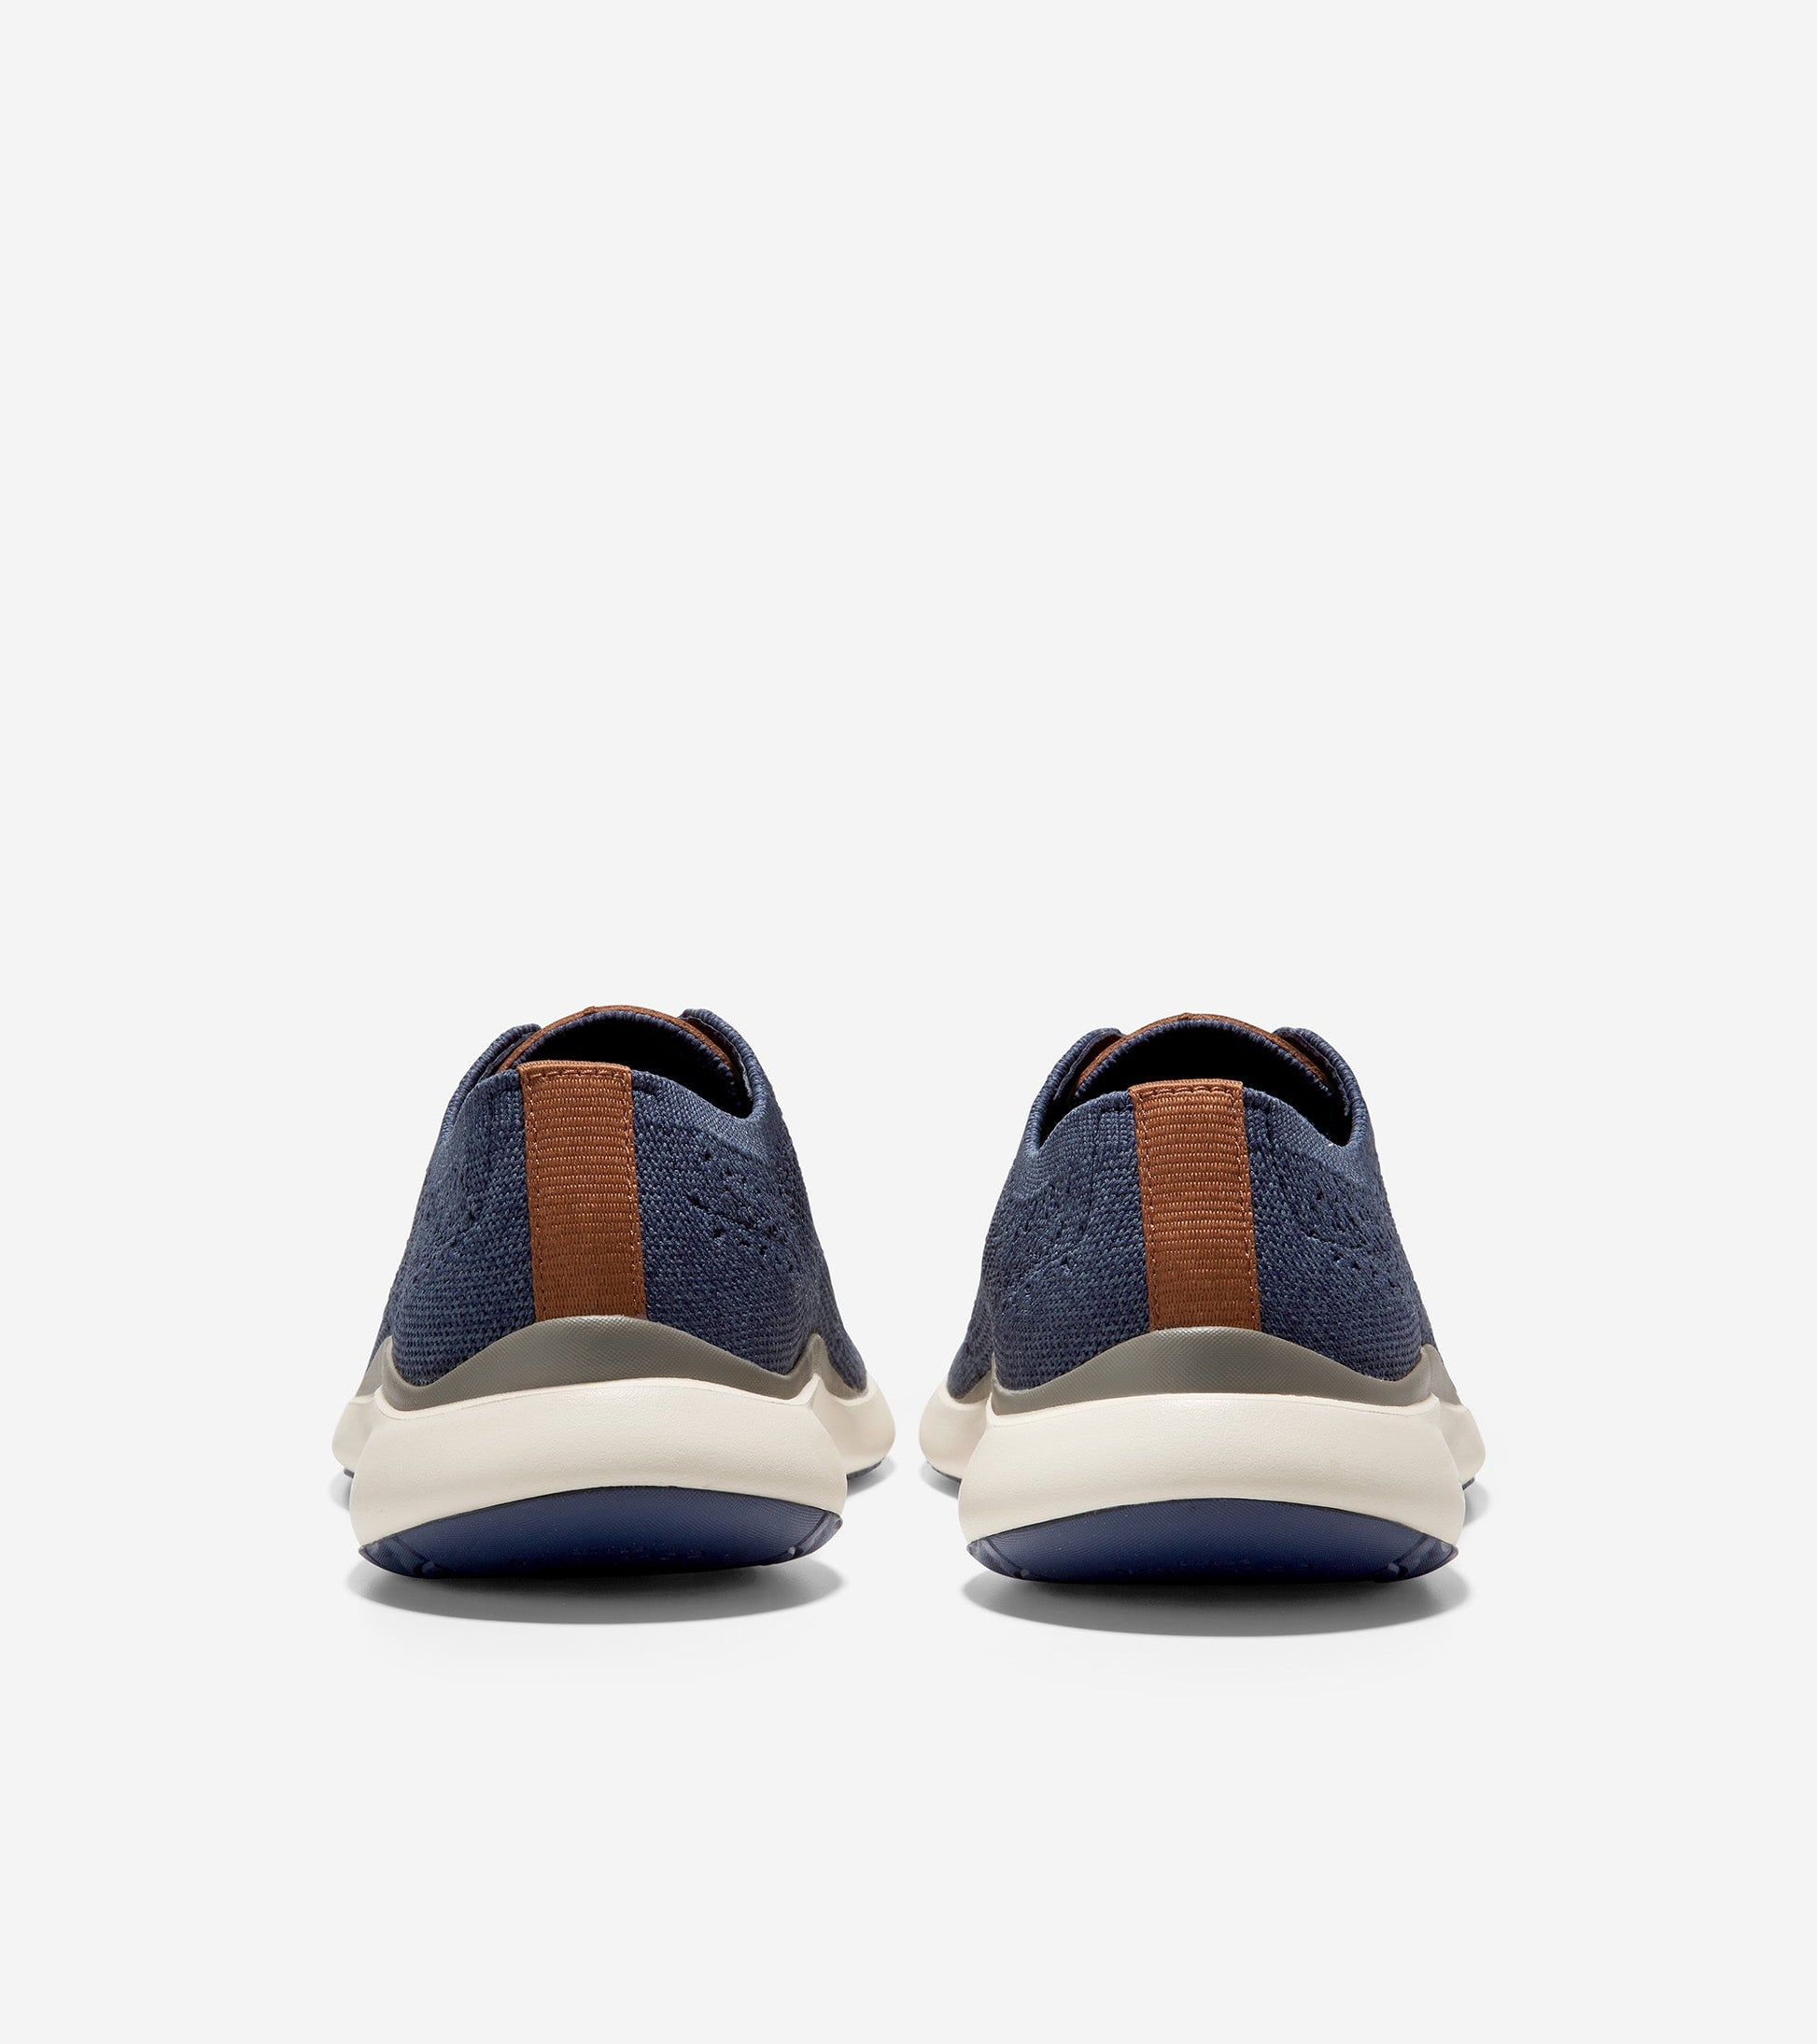 Grand Troy Knit Oxford Marine/Ombre Blue Knit - CH